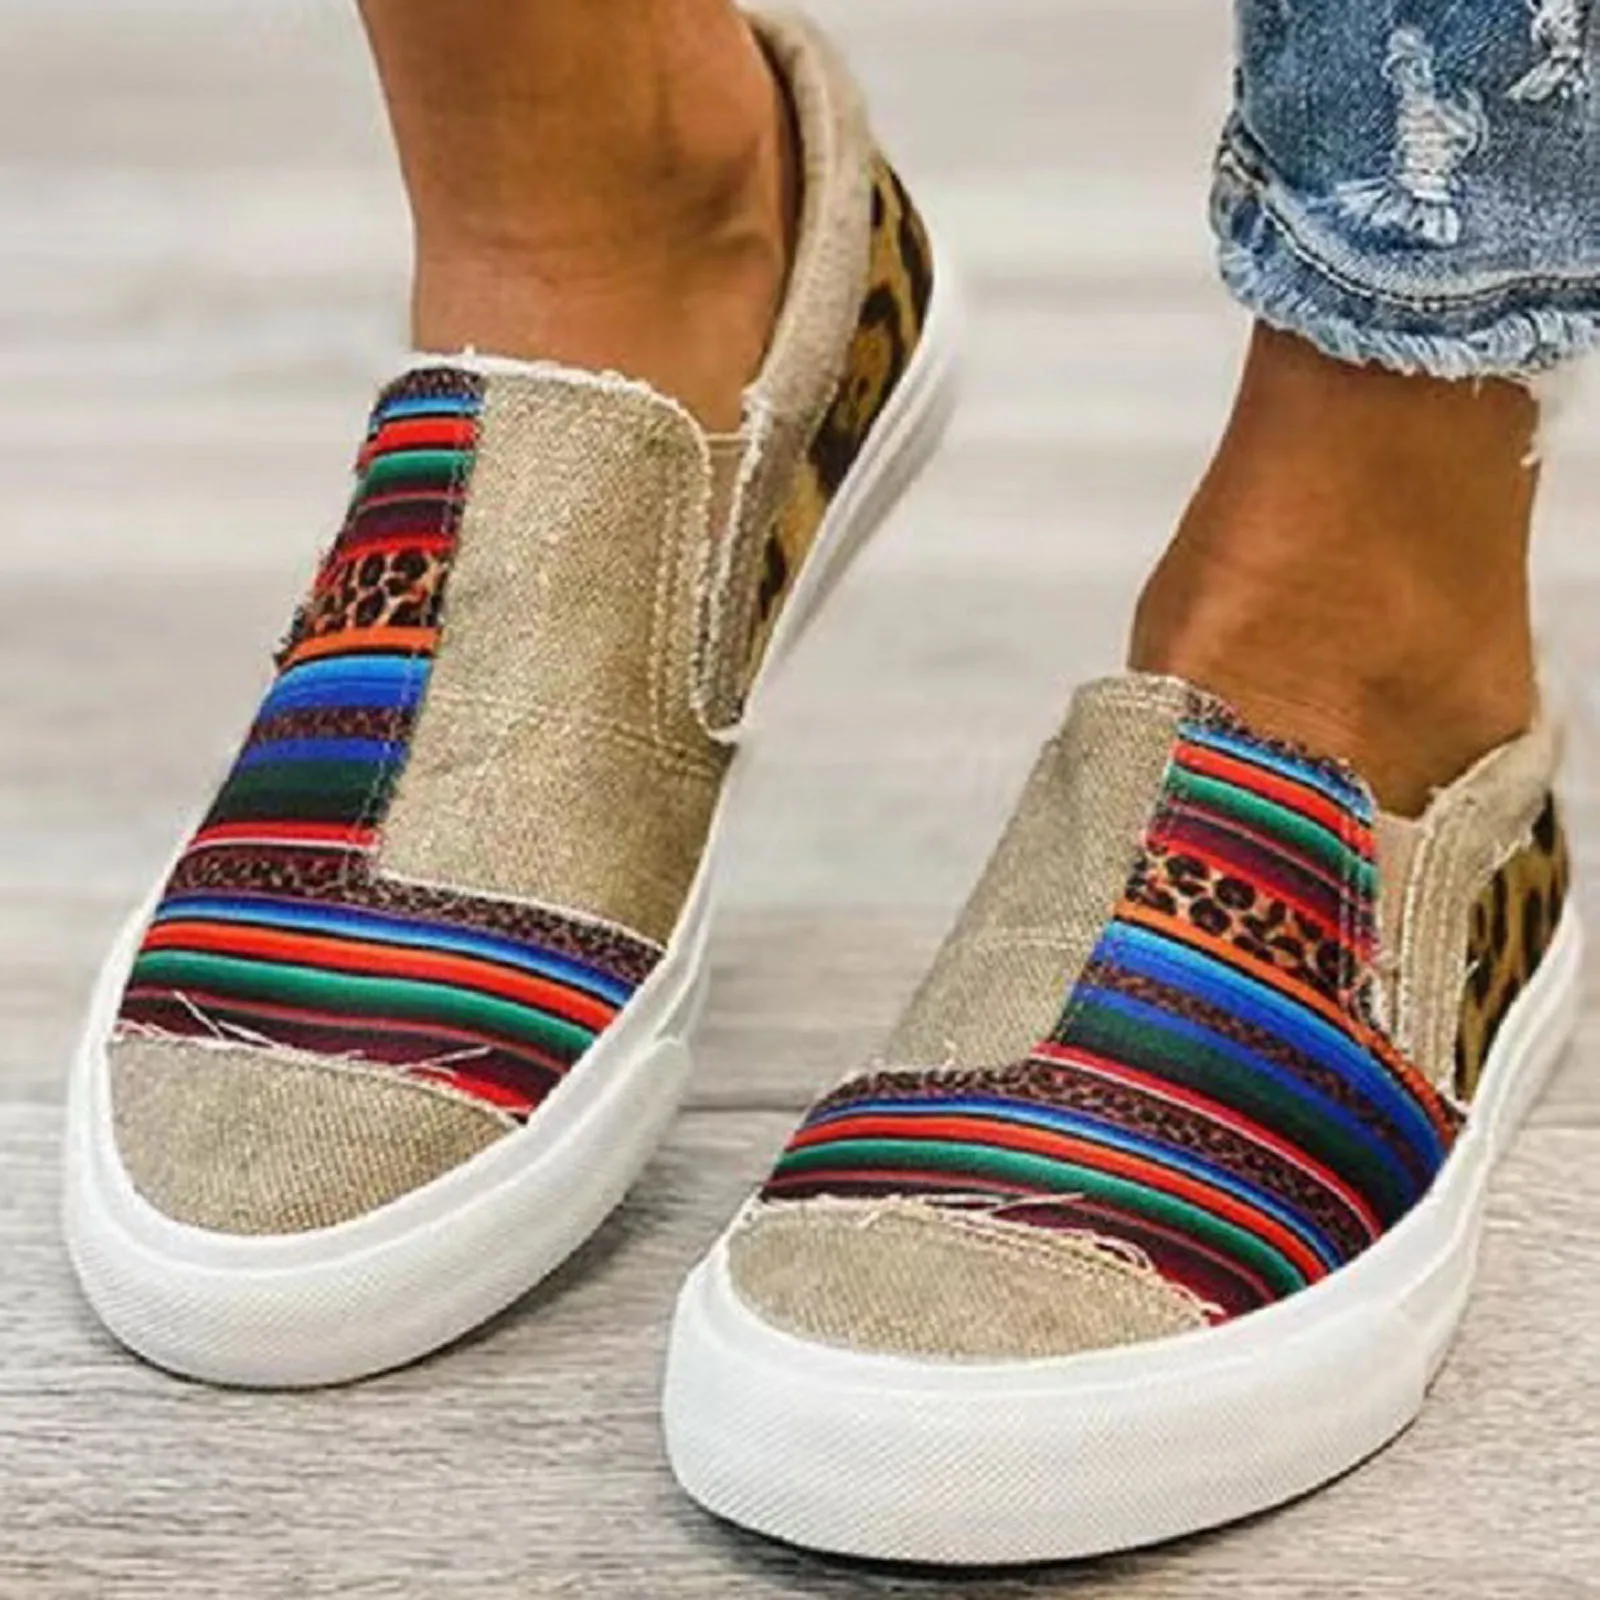 Women Classic Sneakers Campus Loafers Canvas Slip-On Flats shoes Lazy shoes size 